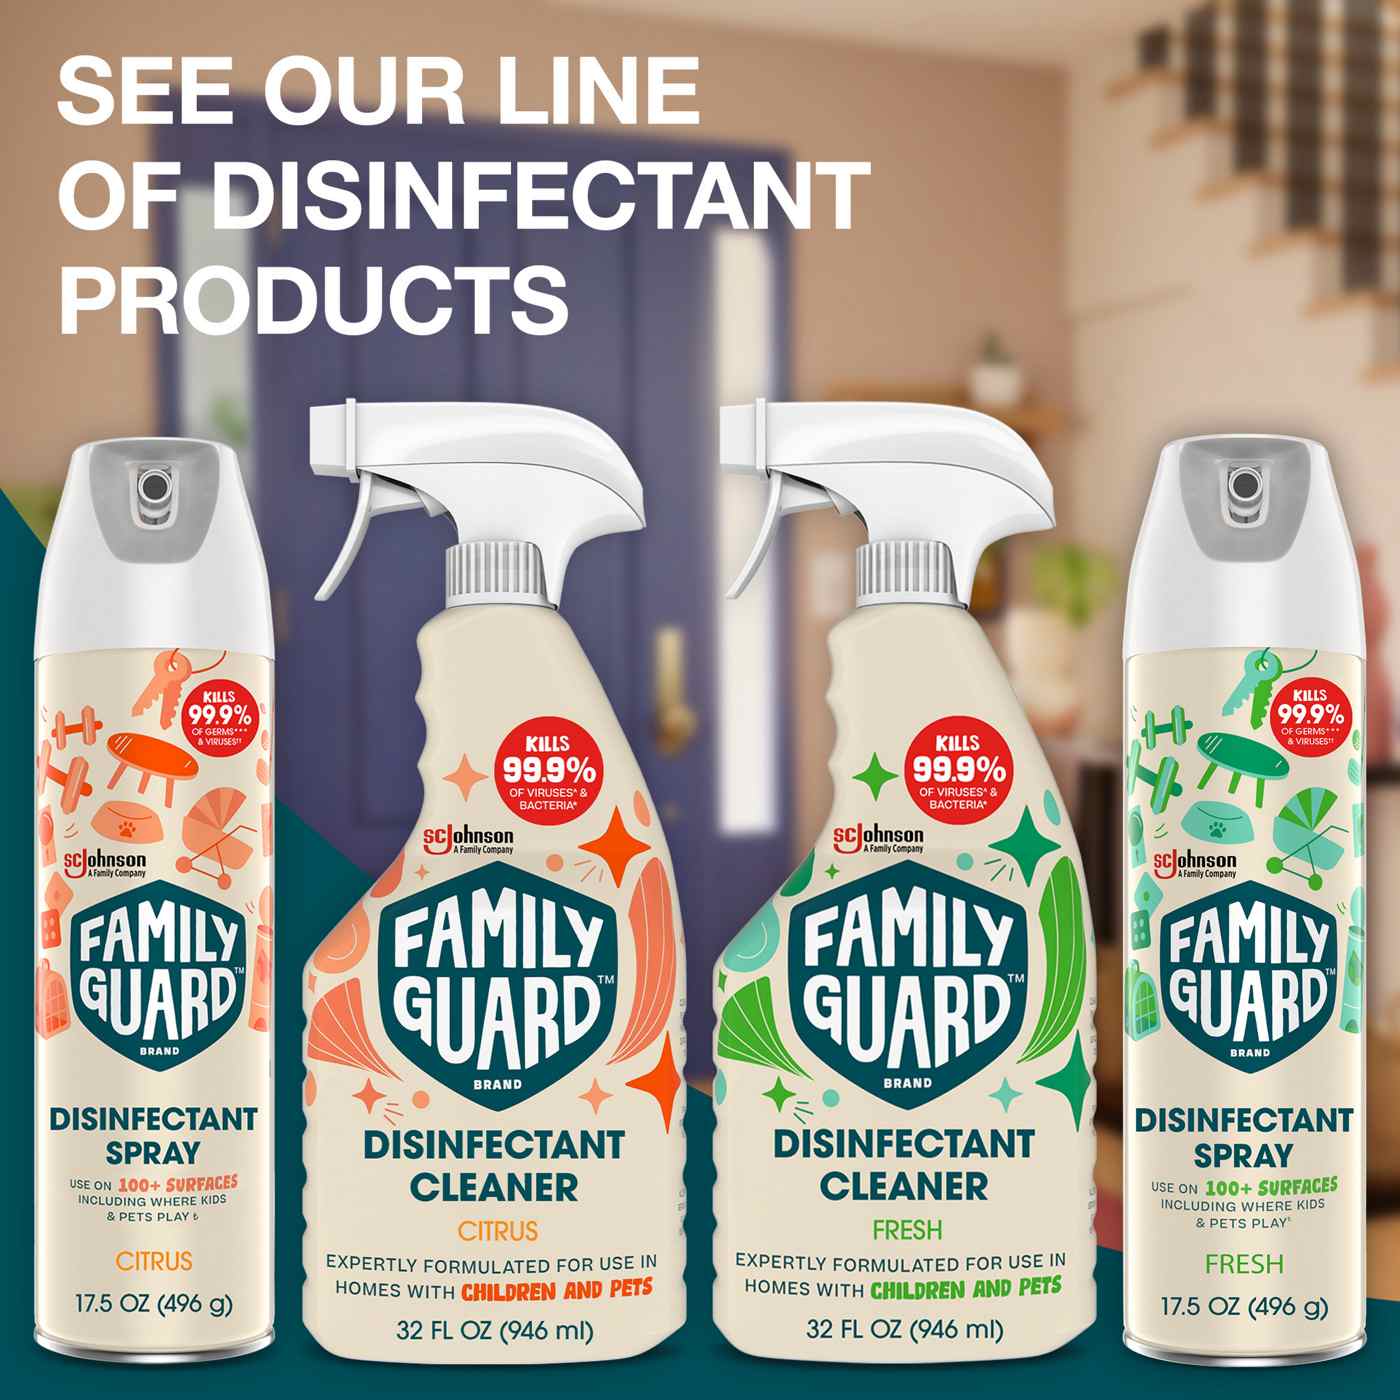 Family Guard Citrus Disinfectant Spray; image 11 of 11